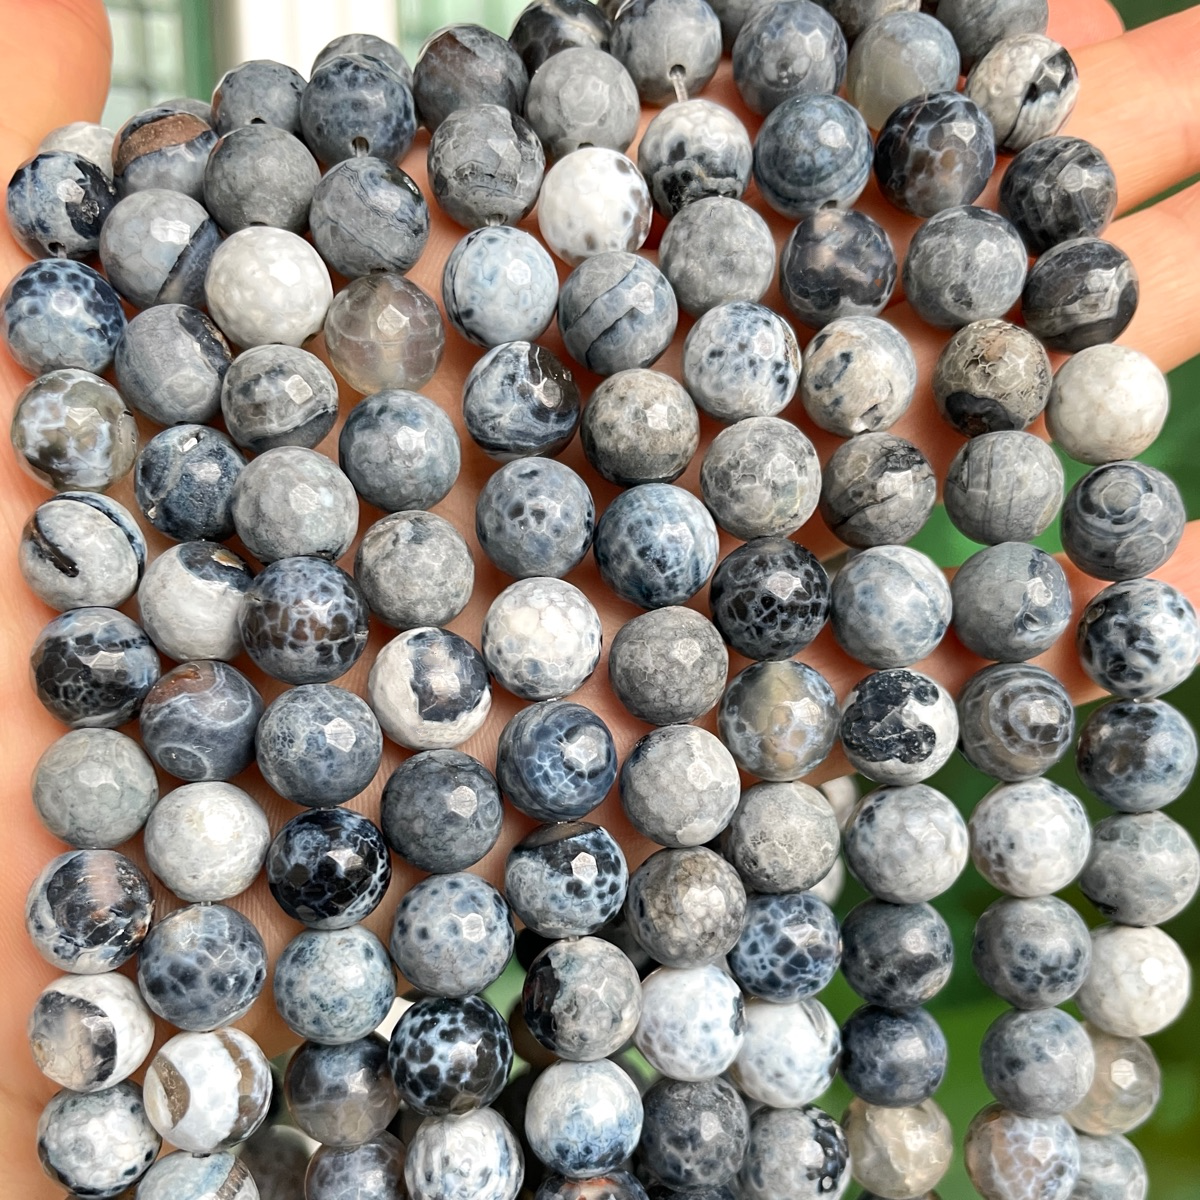 2 Strands/lot 10mm Gray Faceted Fire Agate Stone Beads Stone Beads Faceted Agate Beads New Beads Arrivals Charms Beads Beyond